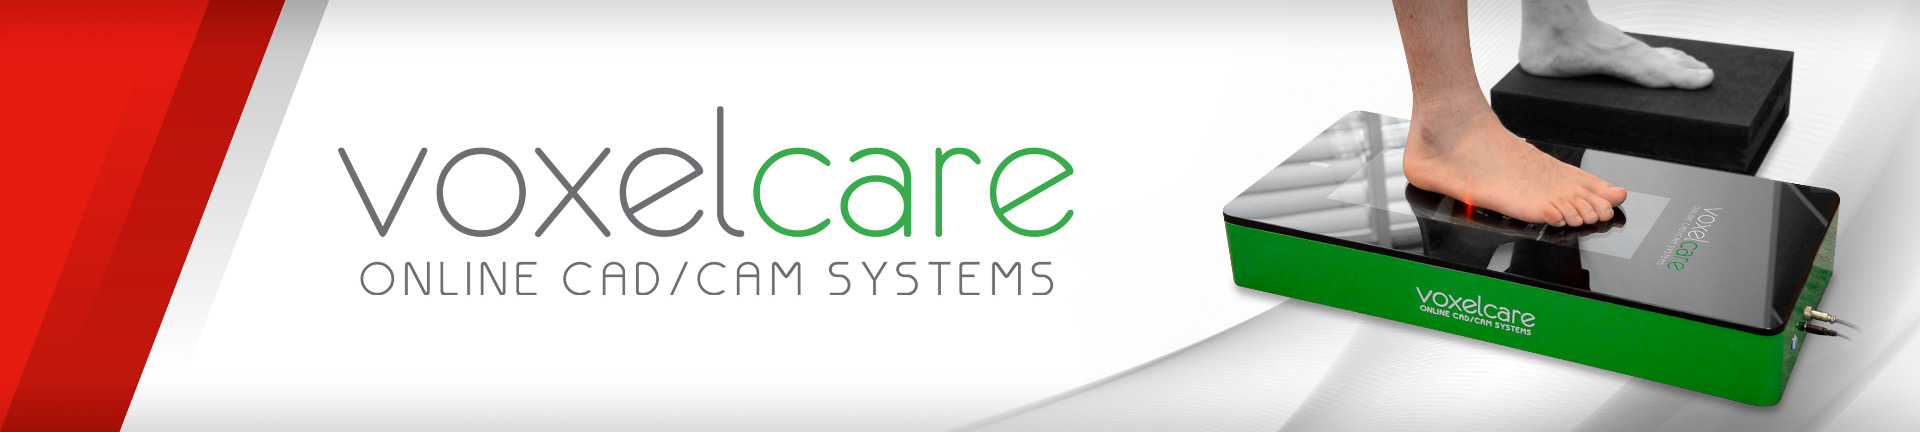 brand-voxelcare-about